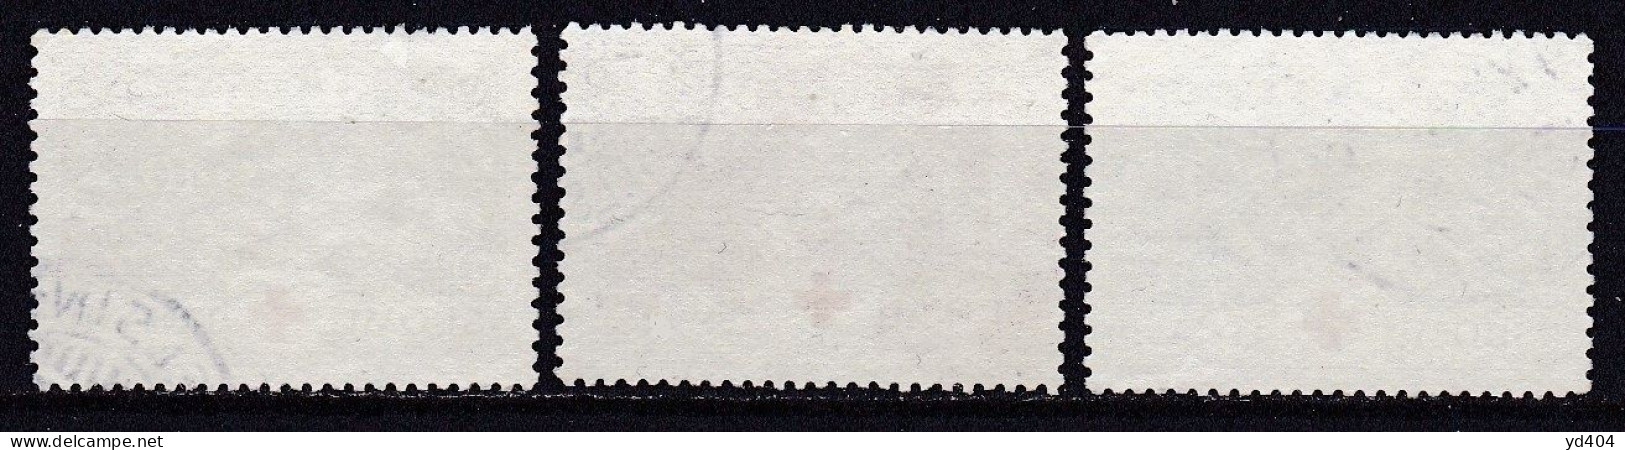 FI048 – FINLANDE – FINLAND – 1934 – RED CROSS FUND – SC B15/17 USED 15 € - Used Stamps